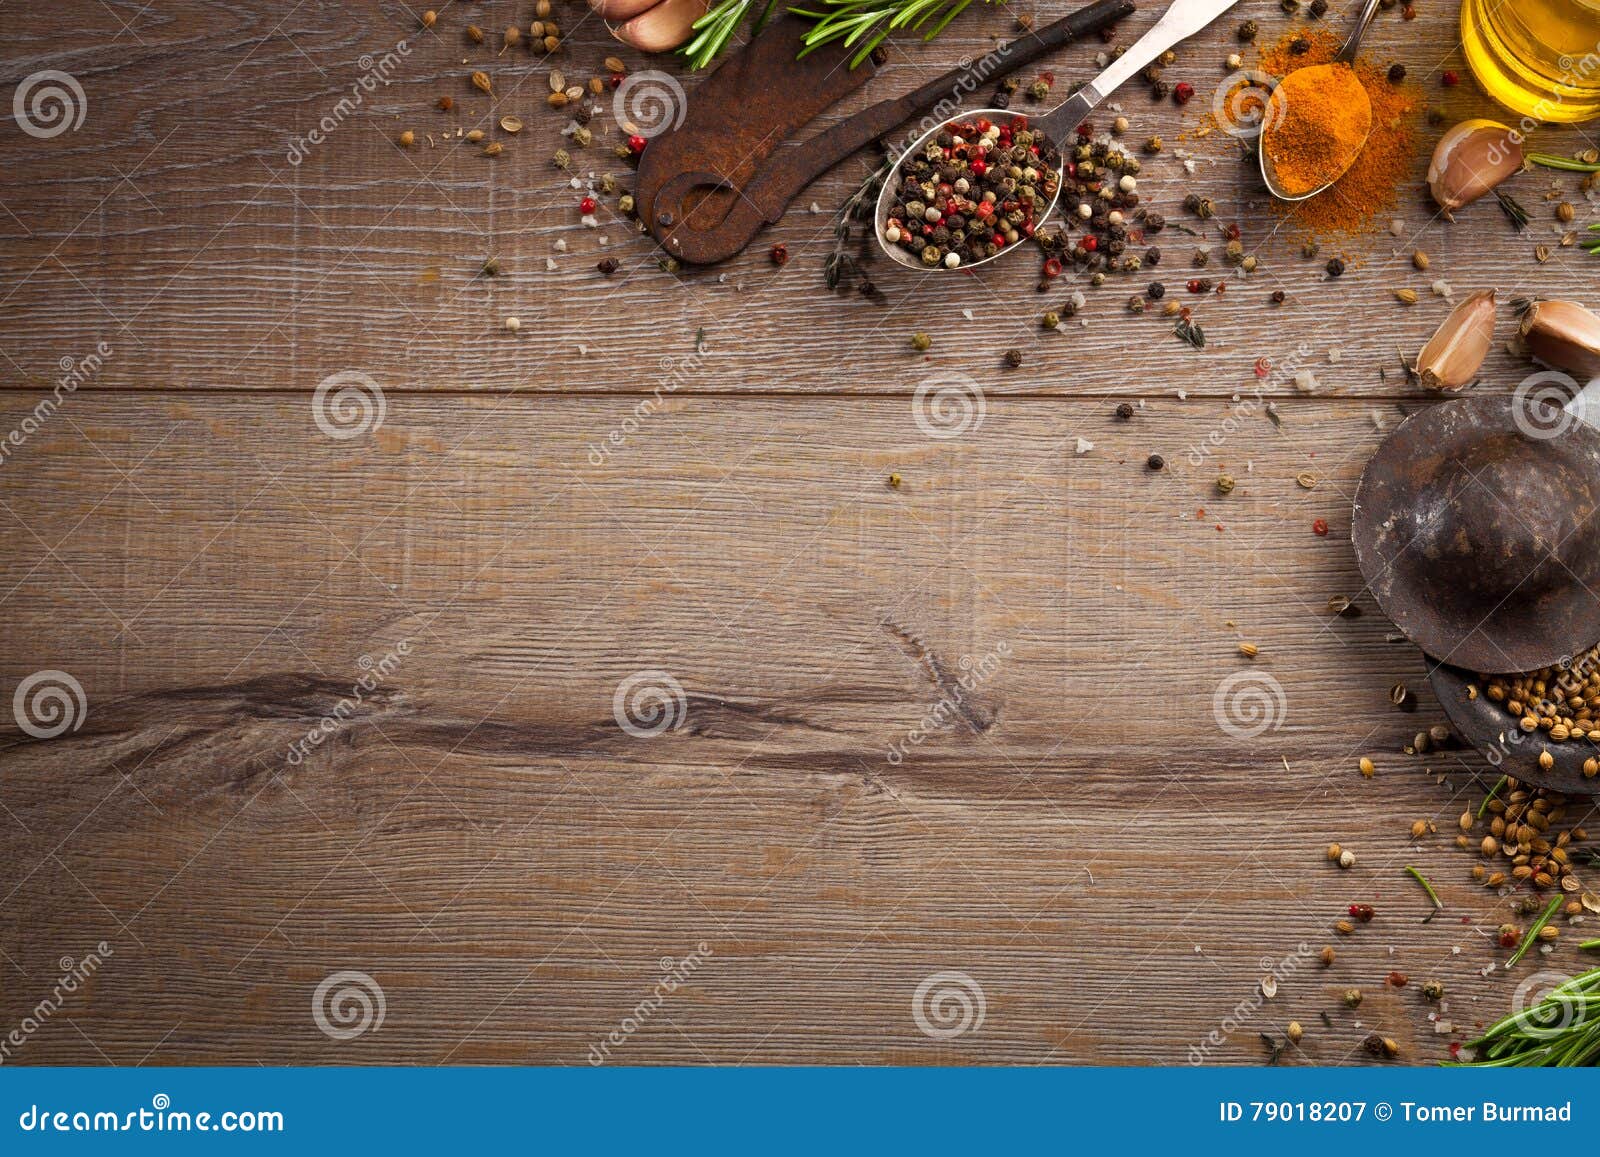 Herbs and Spices on Wood Table Stock Image - Image of rustic, herbs ...